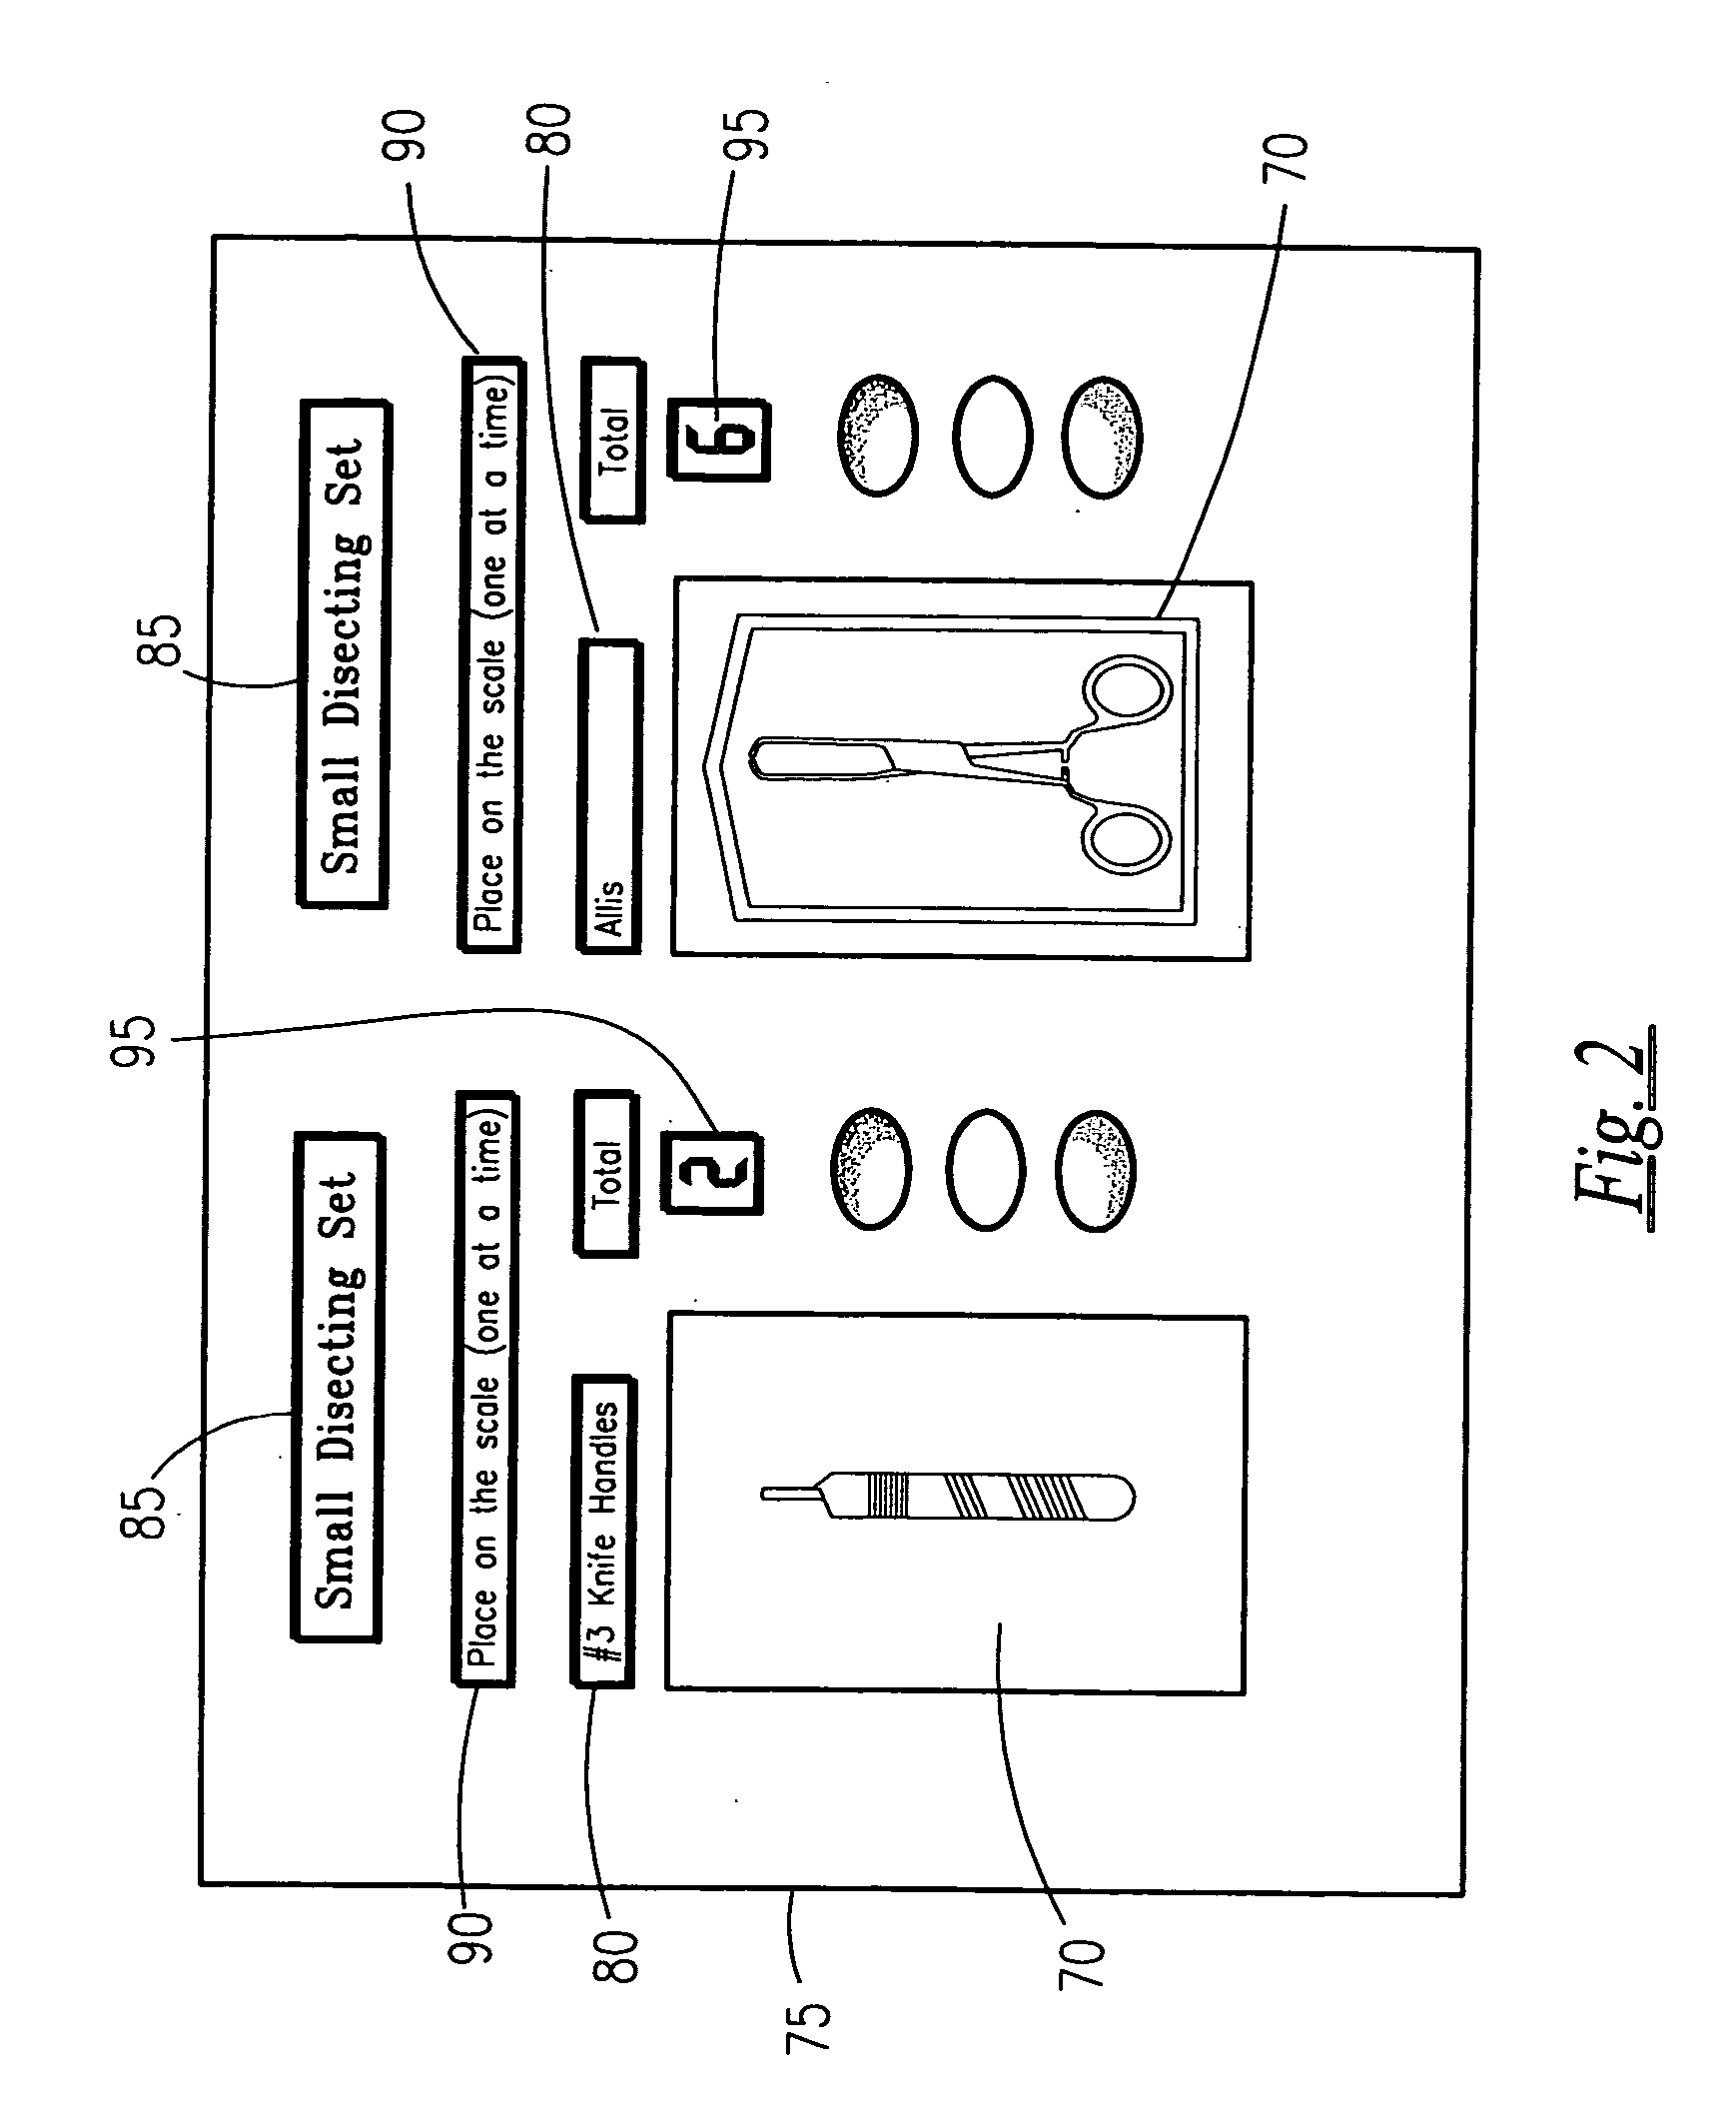 Method and equipment for automated tracking and identification of nonuniform items